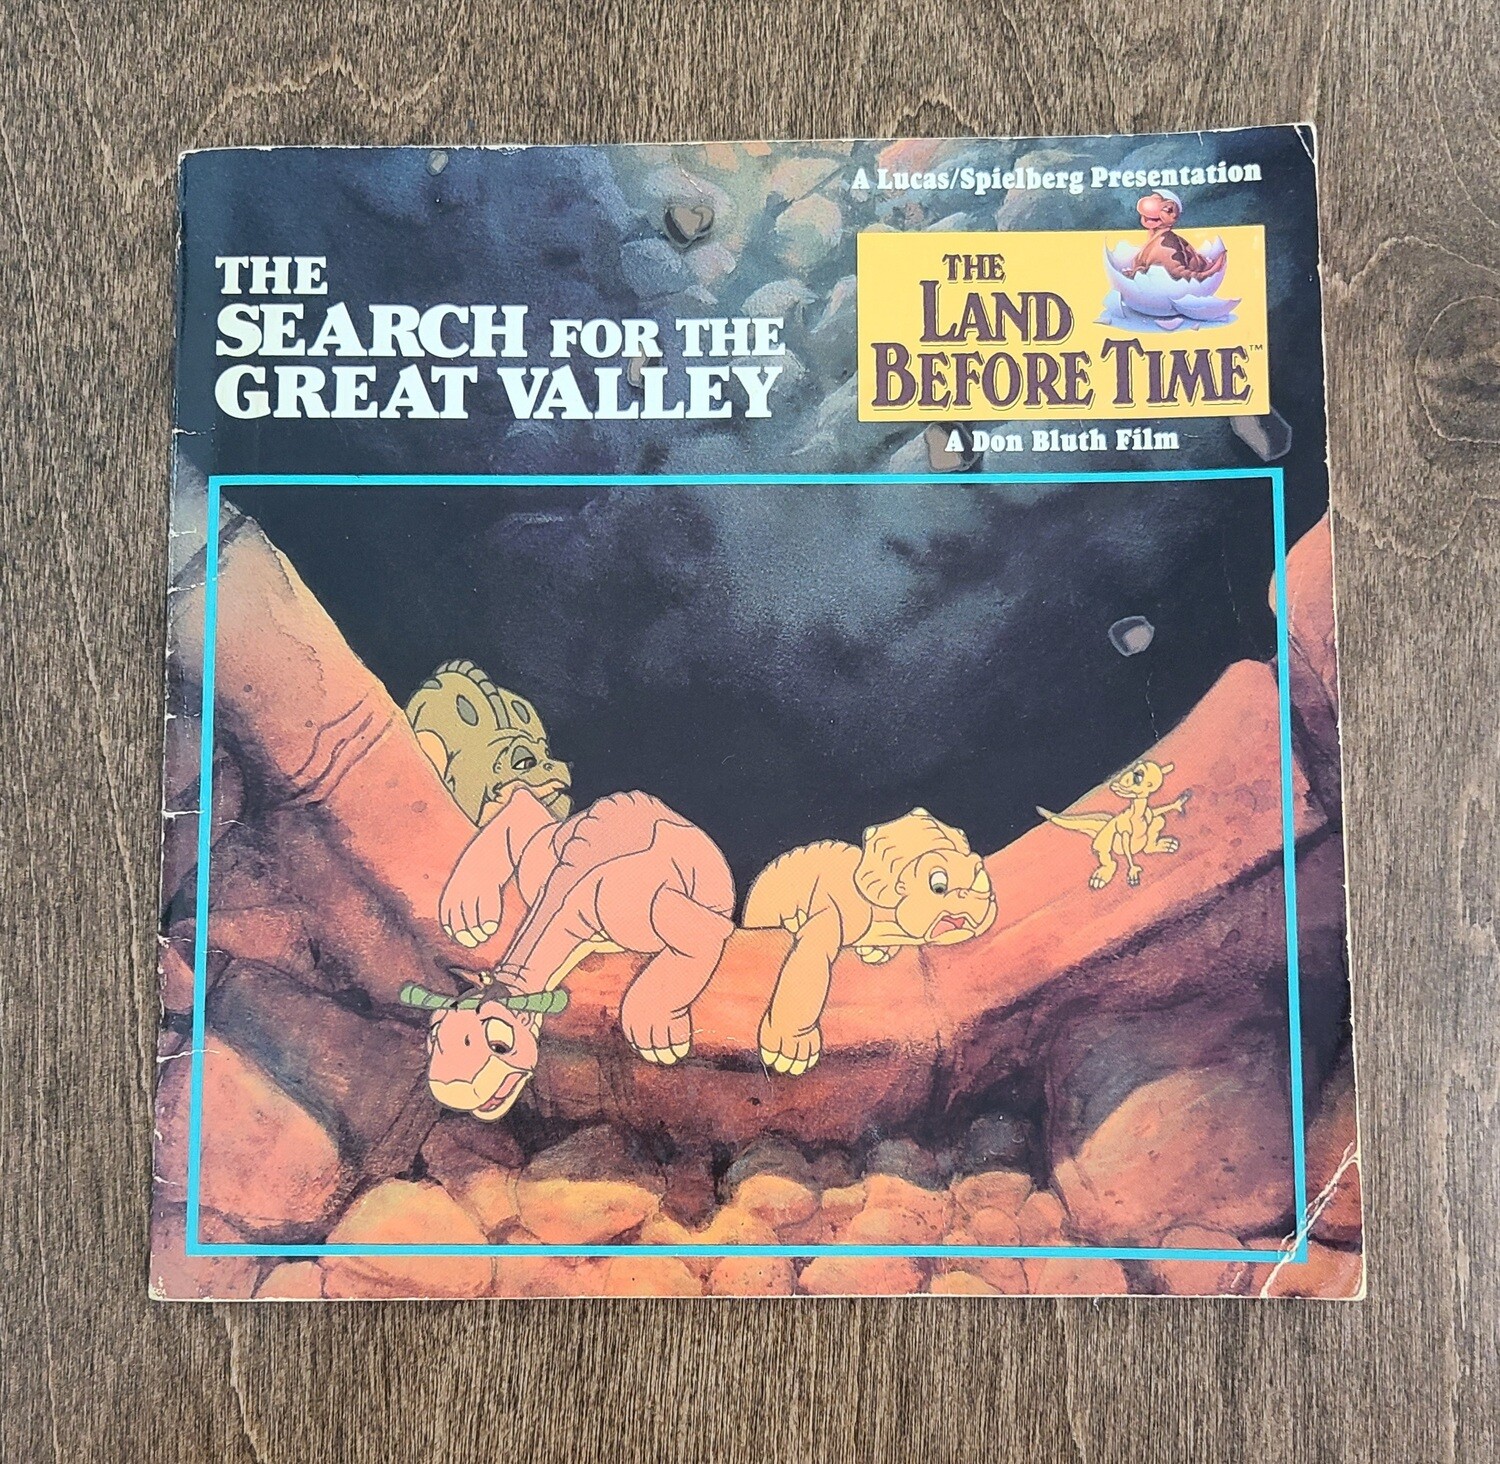 The Land Before Time: The Search for the Great Valley by Jim Razzi